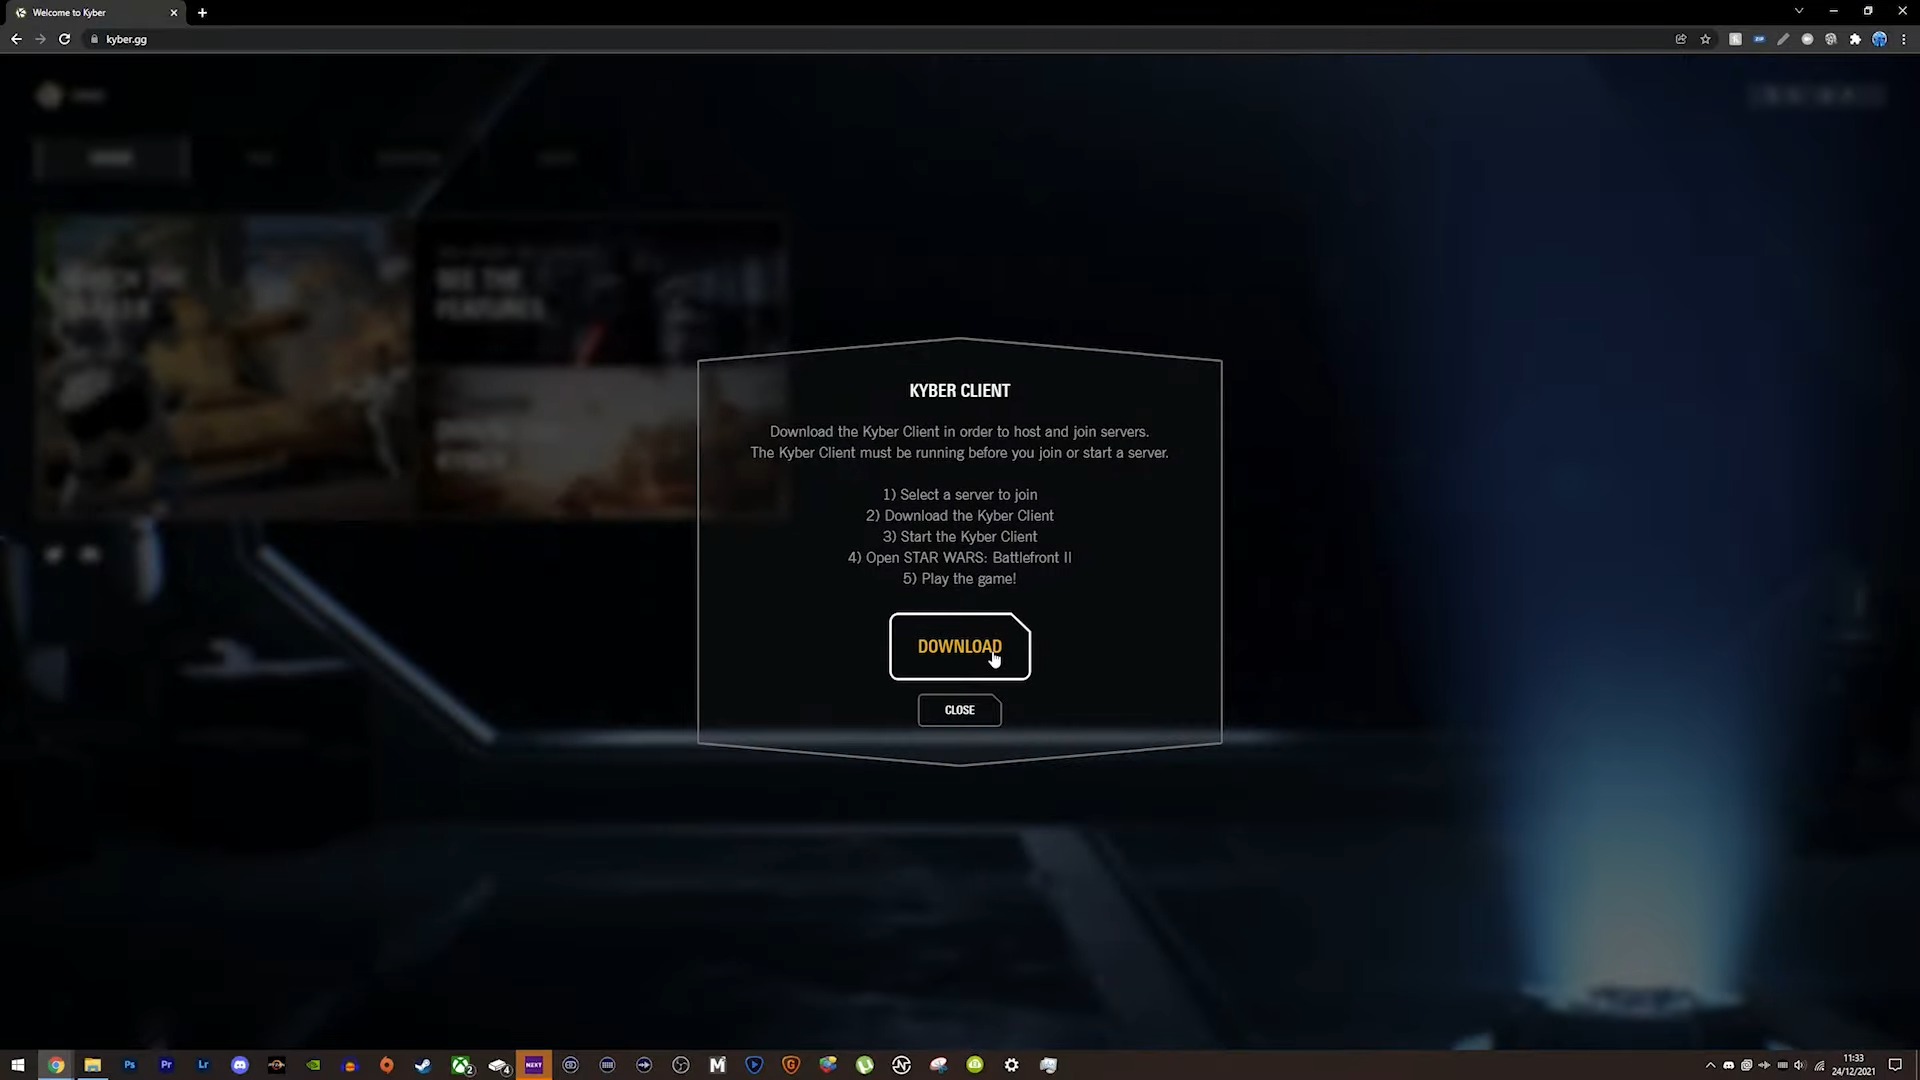 HOW TO DOWNLOAD STAR WARS BATTLEFRONT 2 FROM EPIC GAMES LAUNCHER? 